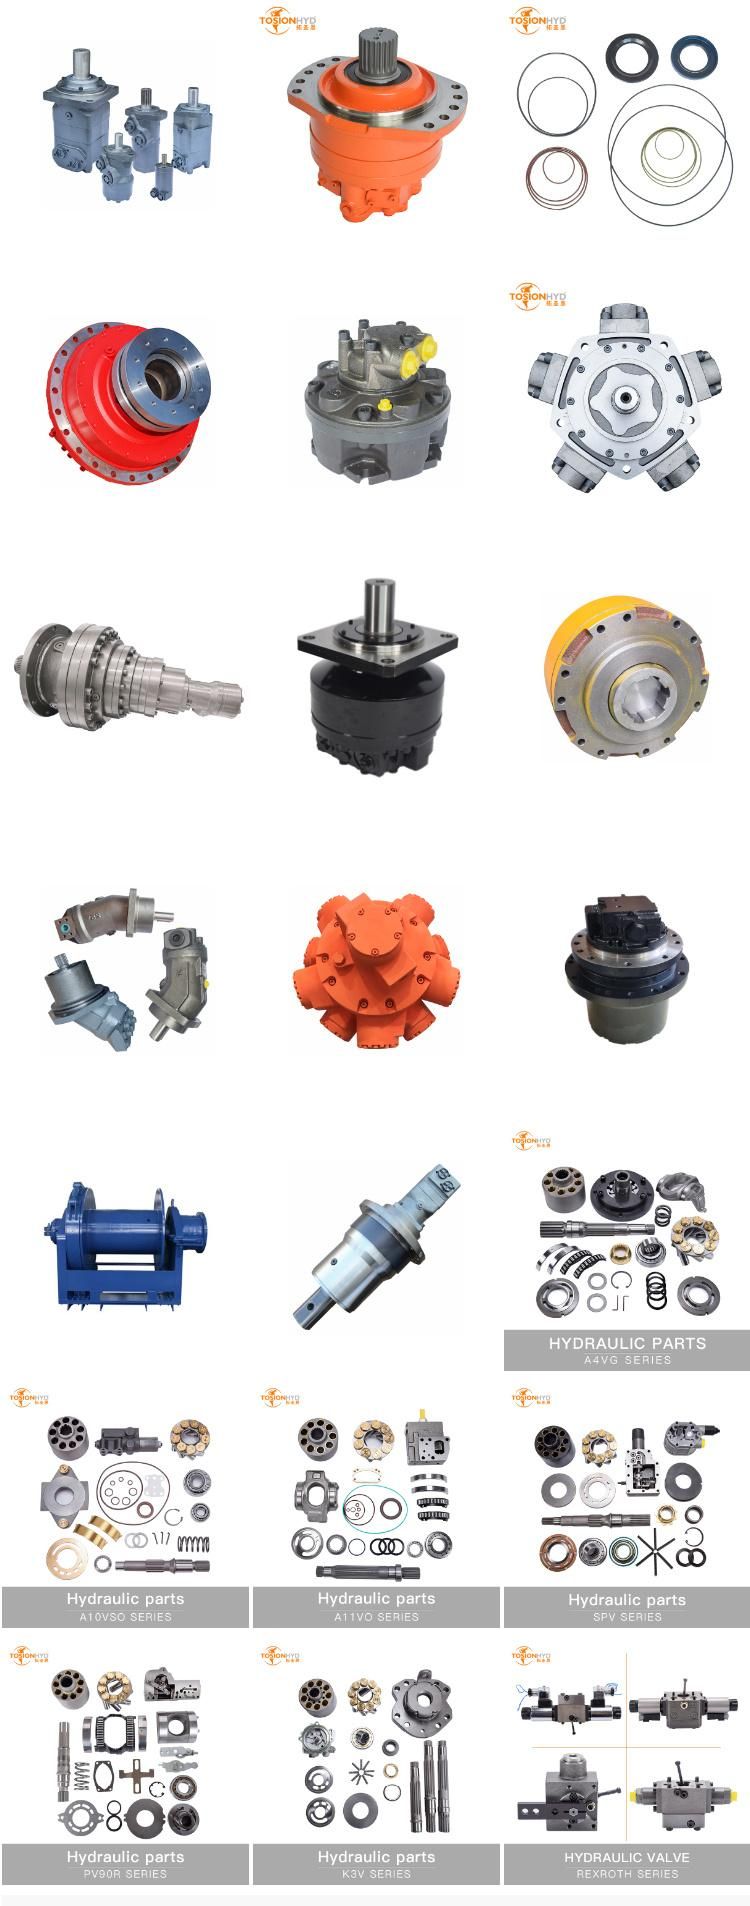 A6ve 28 Hydraulic Motor Parts with Rexroth Spare Repair Kits